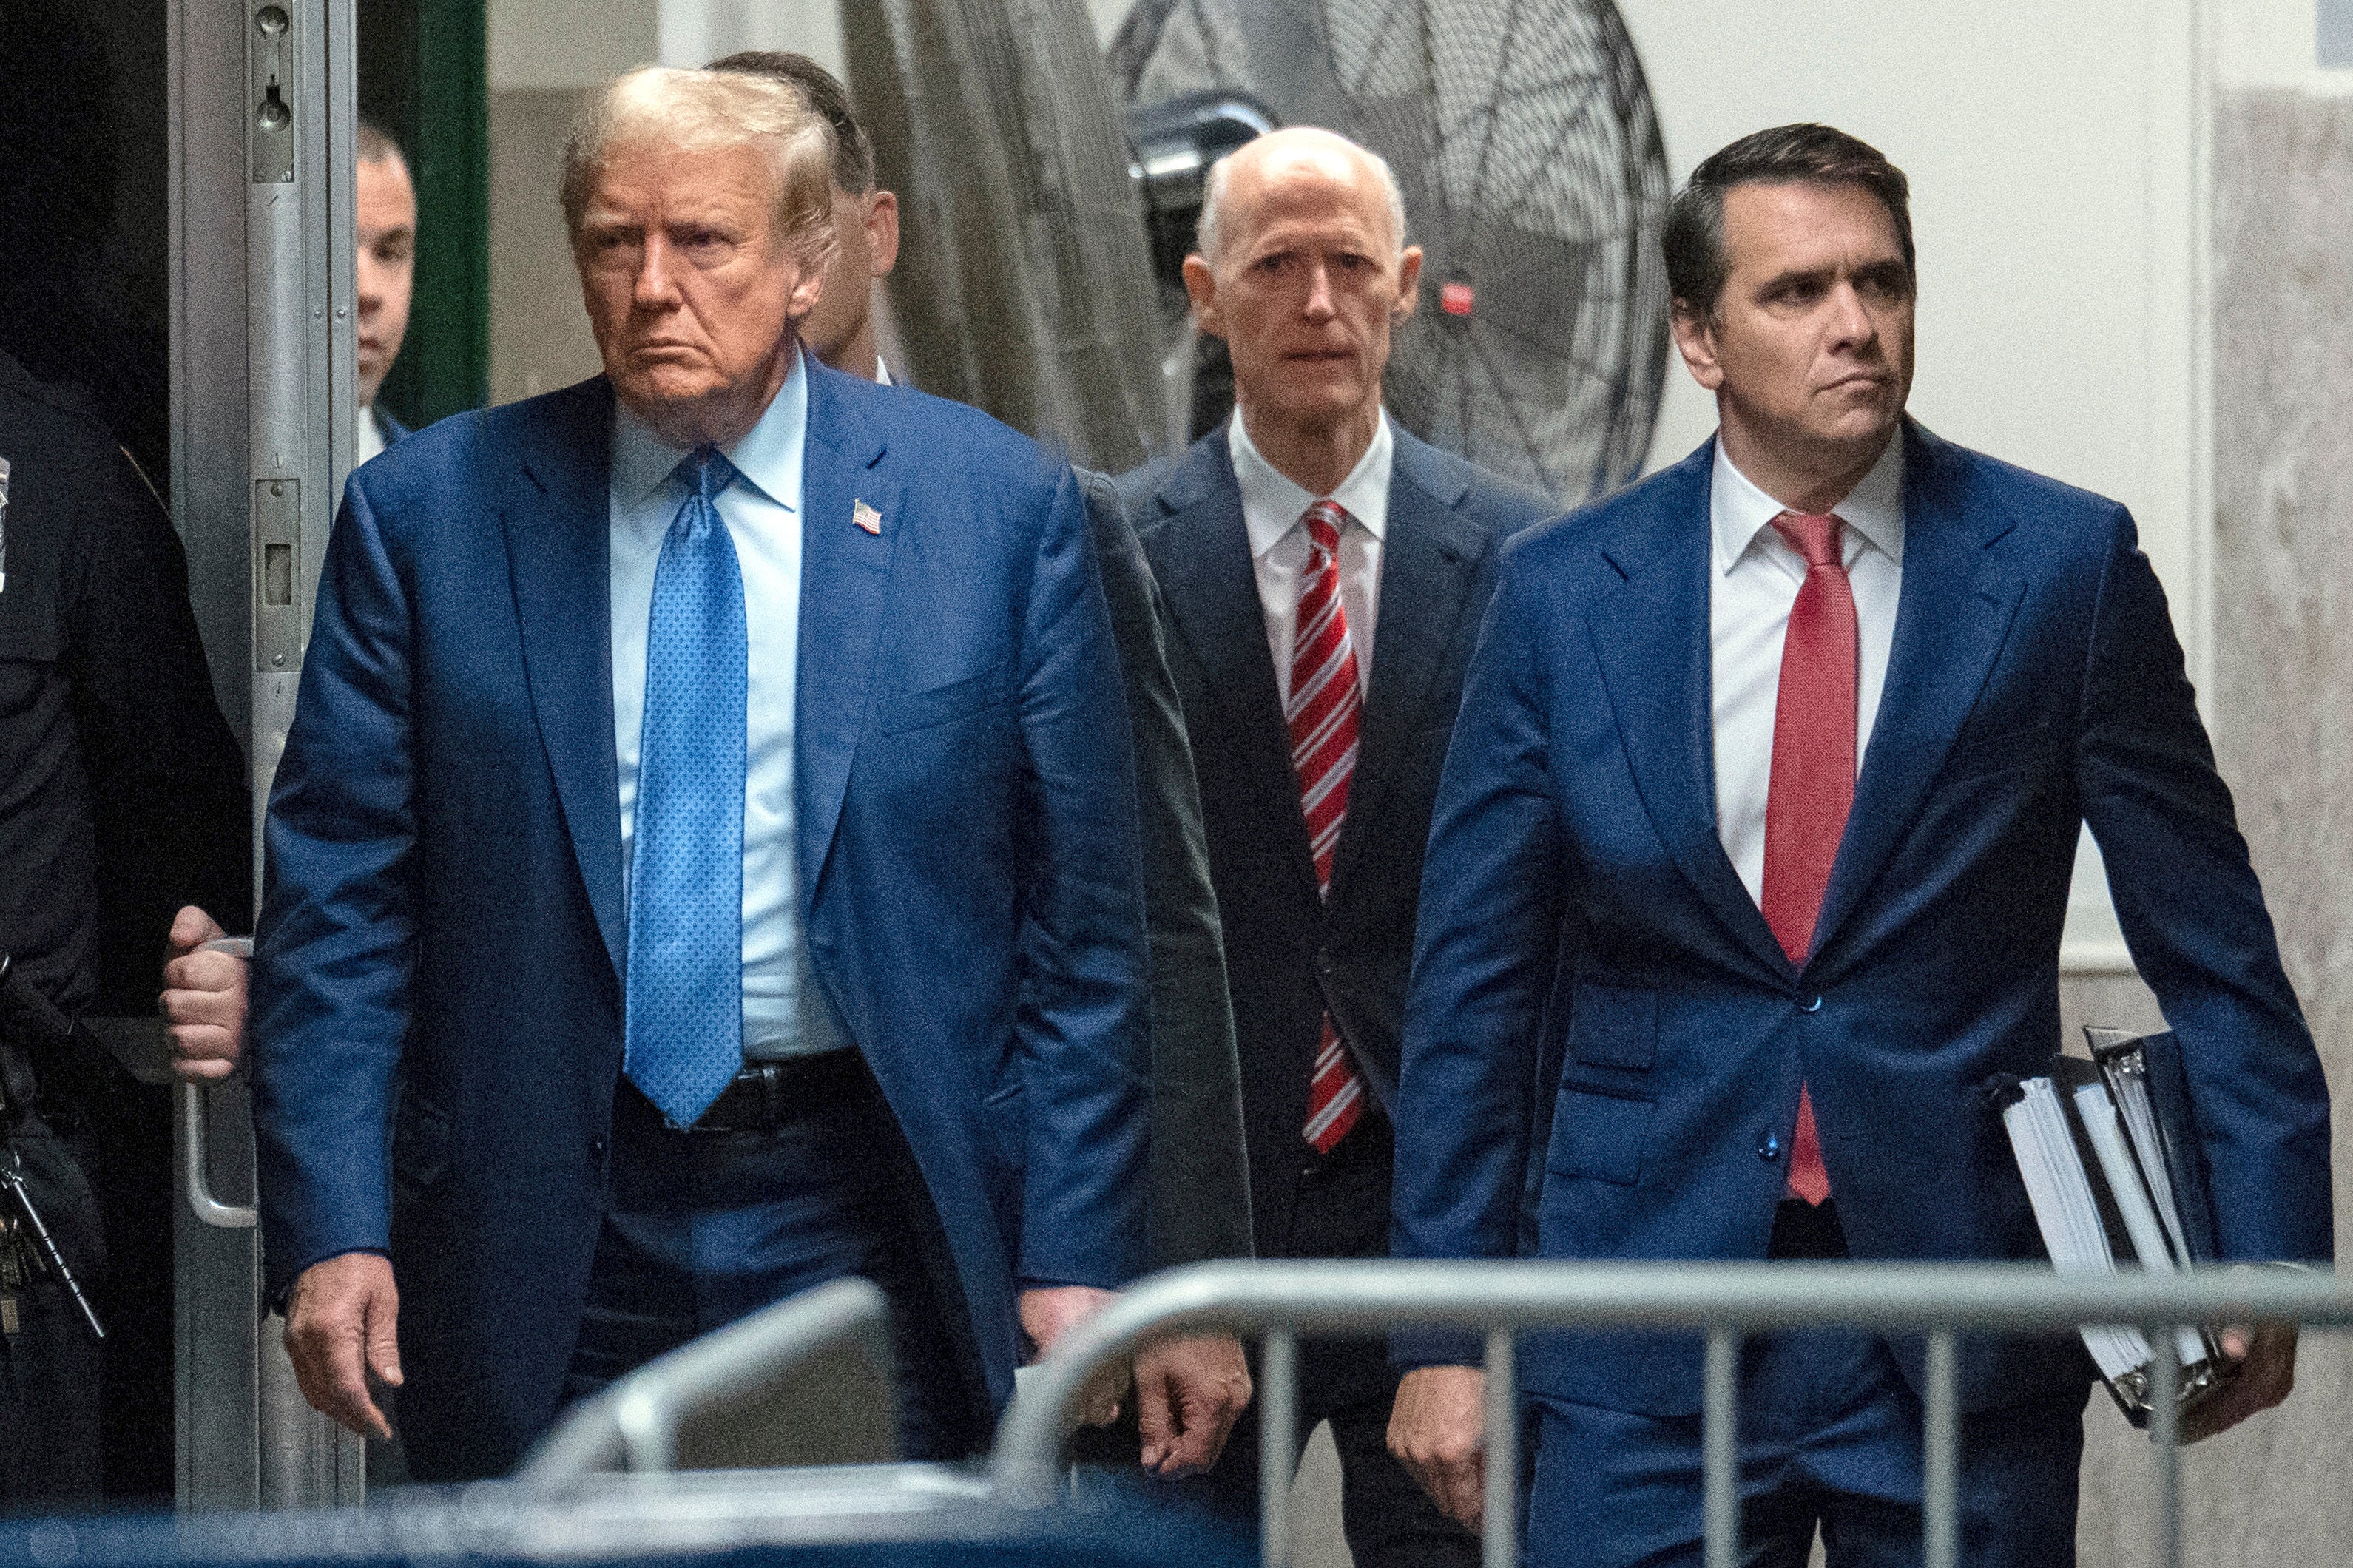 Donald Trump (left), Rick Scott (centre) and attorney Todd Blanche (right) walk into the Manhattan Criminal Court on 9 May. Mr Scott, a GOP senator from Florida, is a staunch ally of the former president